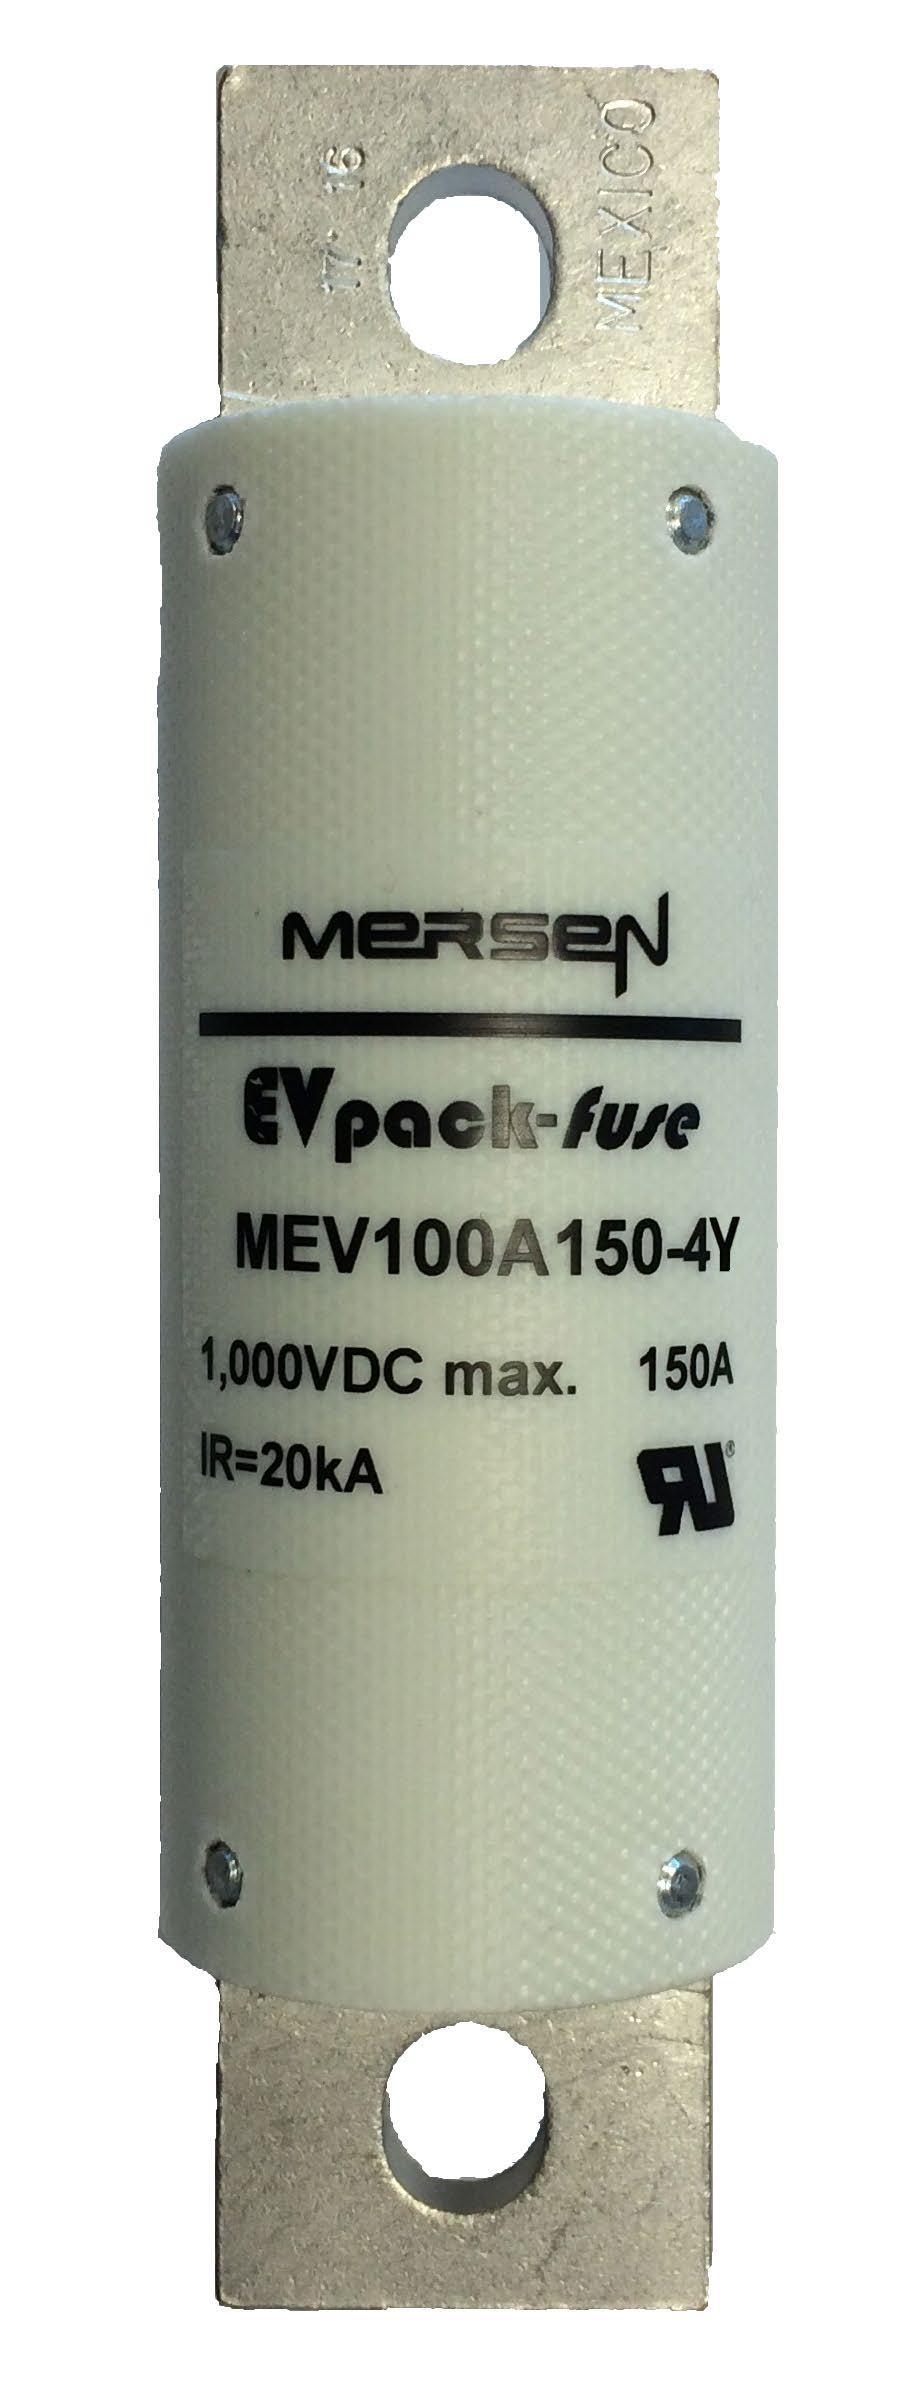 EVpack-fuse MEV00 PRODUCT RANGE MEV00A Round Body Fuse for Metric Screws Rated current In Power dissipation at 0. In Min. breaking capacity (MBC) Max. time to clear MBC MEV00A0-4Y 000 V 0 A.